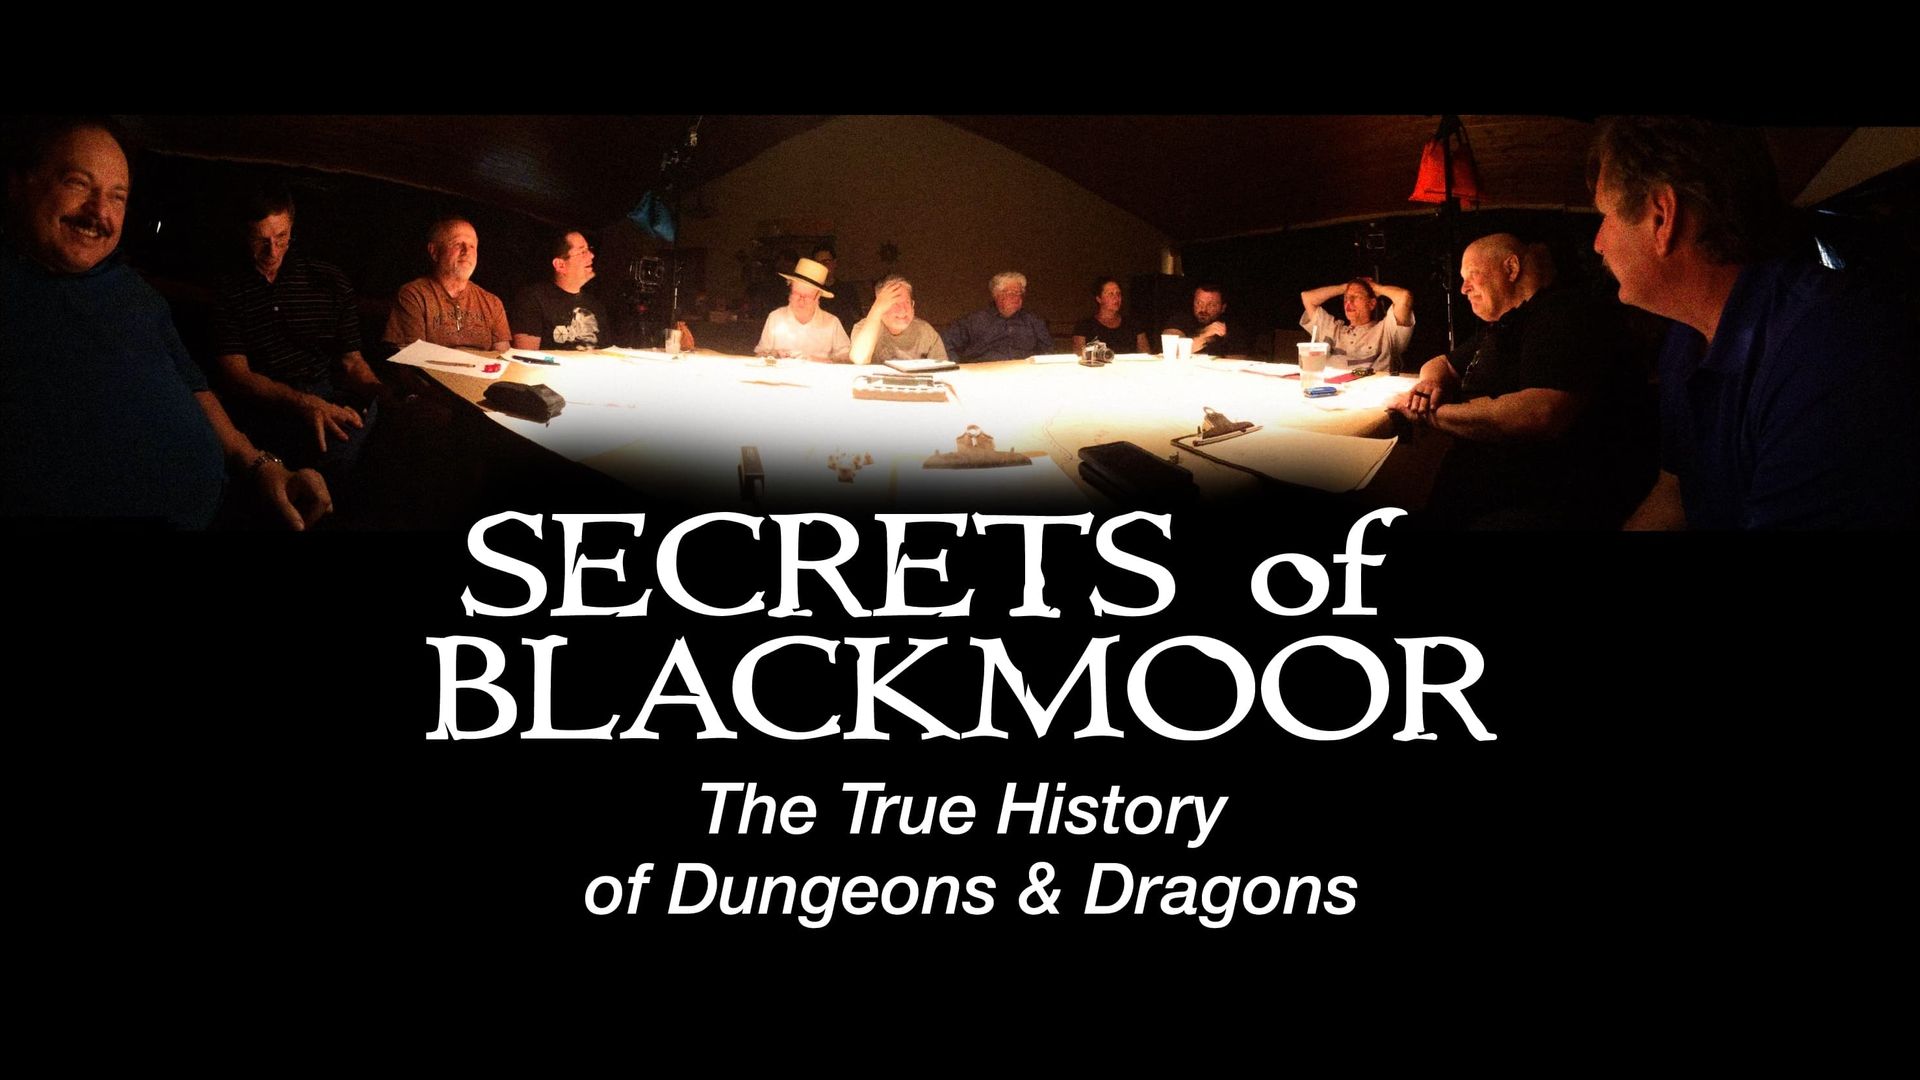 Secrets of Blackmoor: The True History of Dungeons & Dragons background